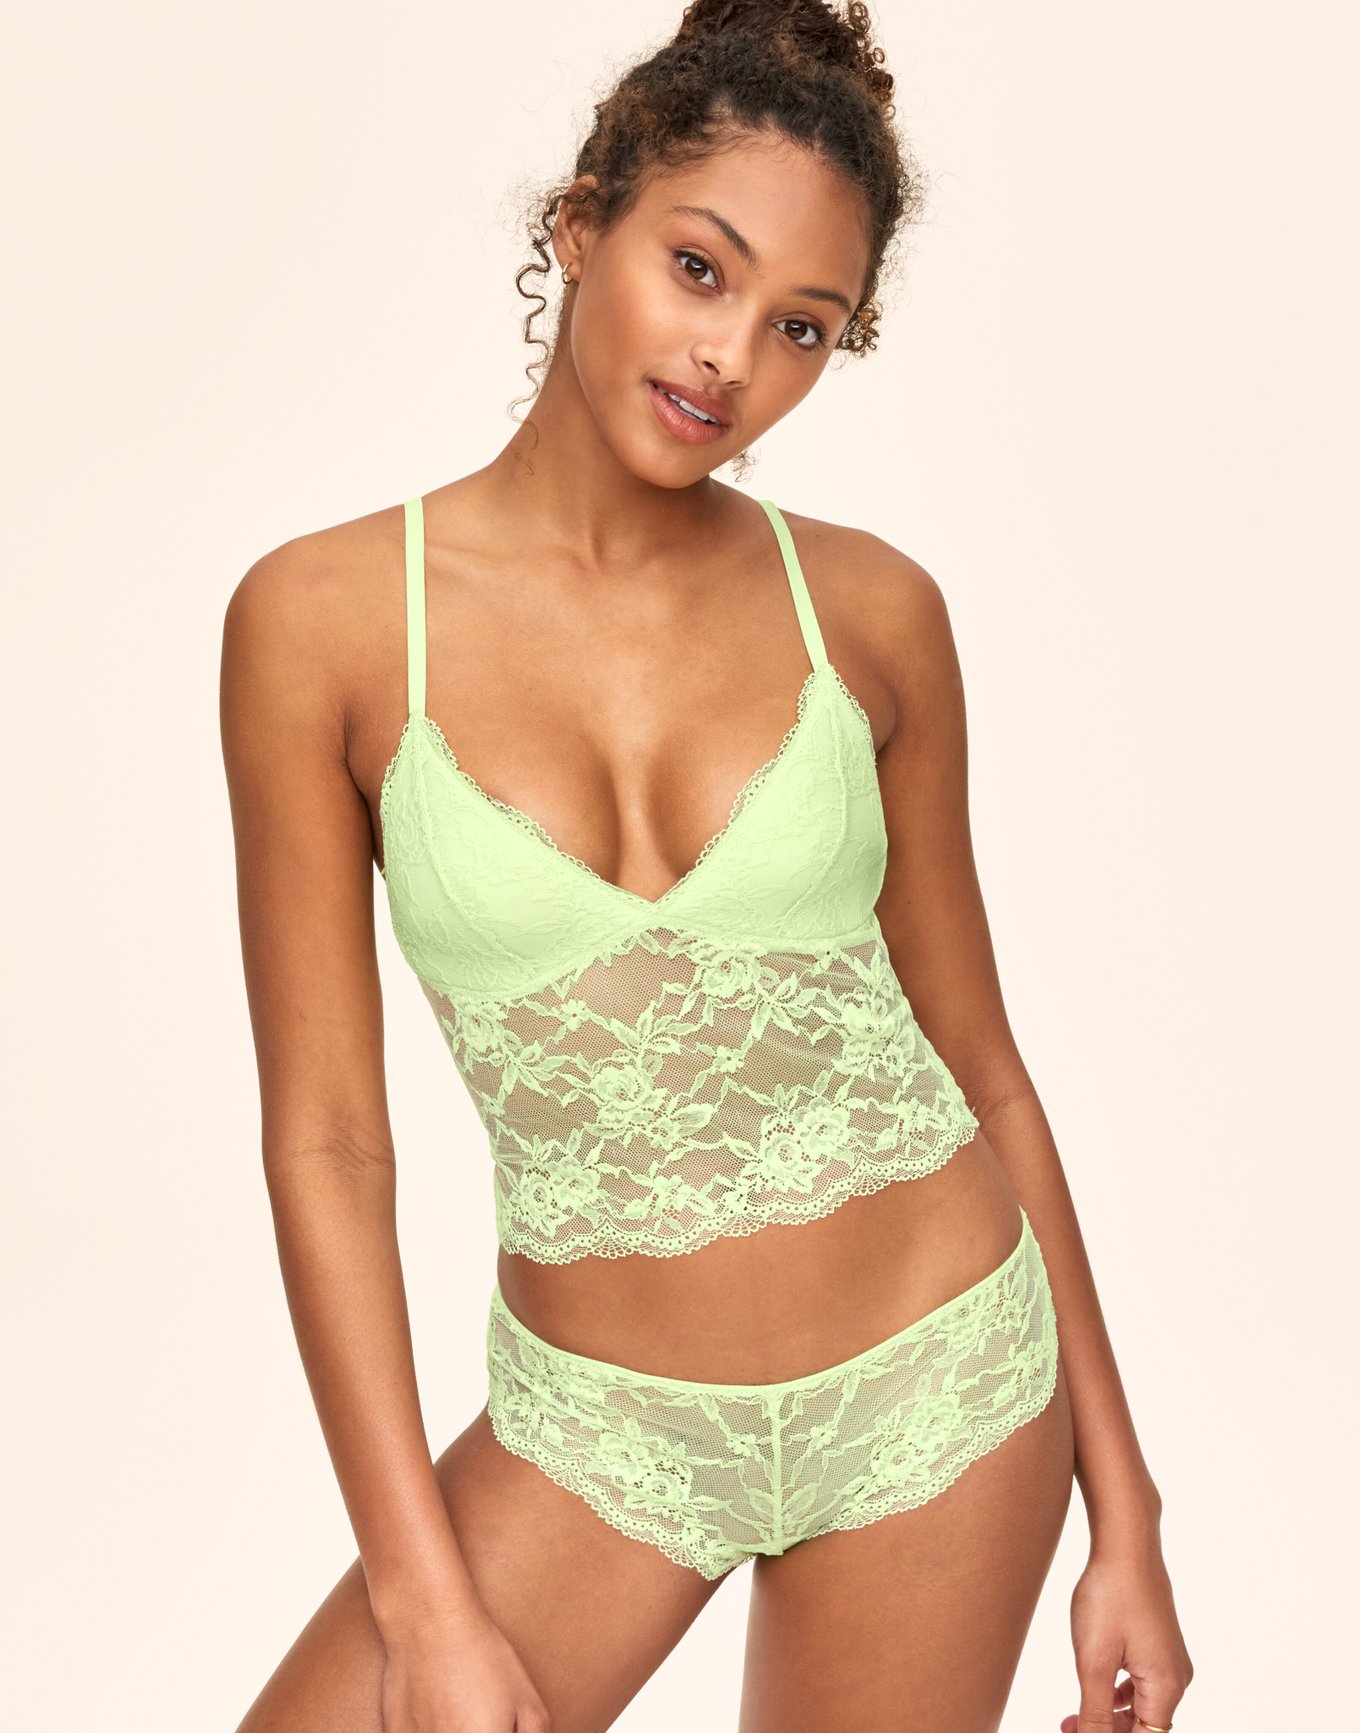 Sustainable Bra Reviews, Press and how 'sustainable' is recycled polye –  The Very Good Bra